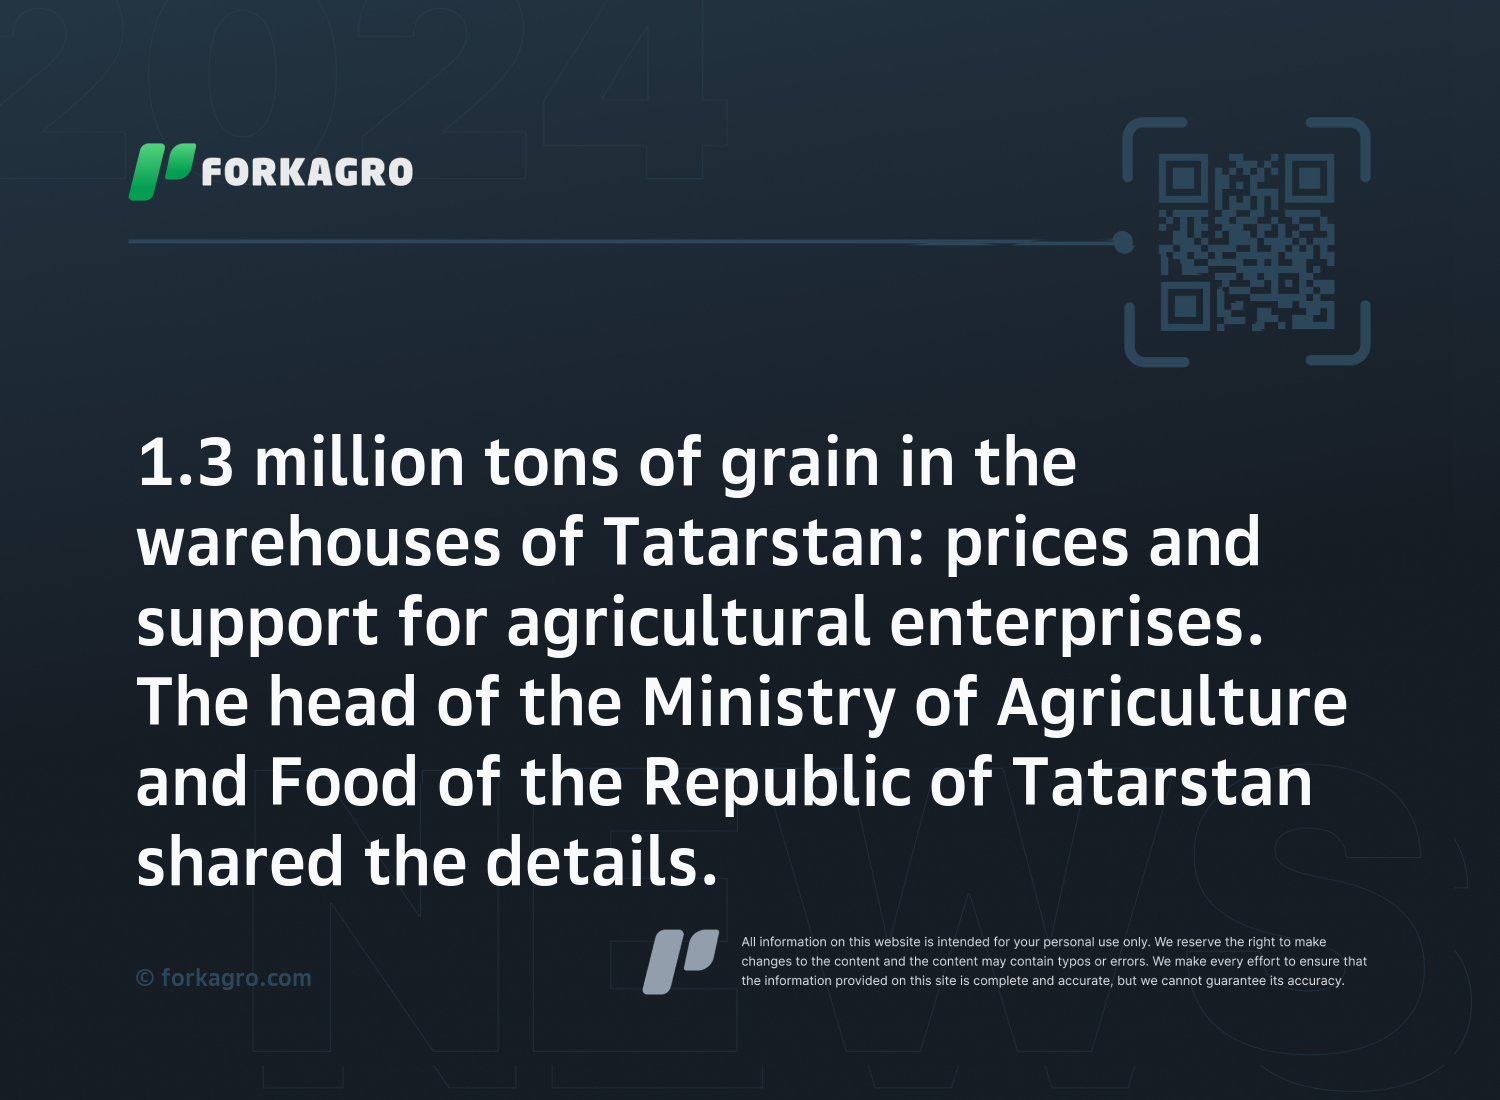 1.3 million tons of grain in the warehouses of Tatarstan: prices and support for agricultural enterprises. The head of the Ministry of Agriculture and Food of the Republic of Tatarstan shared the details.